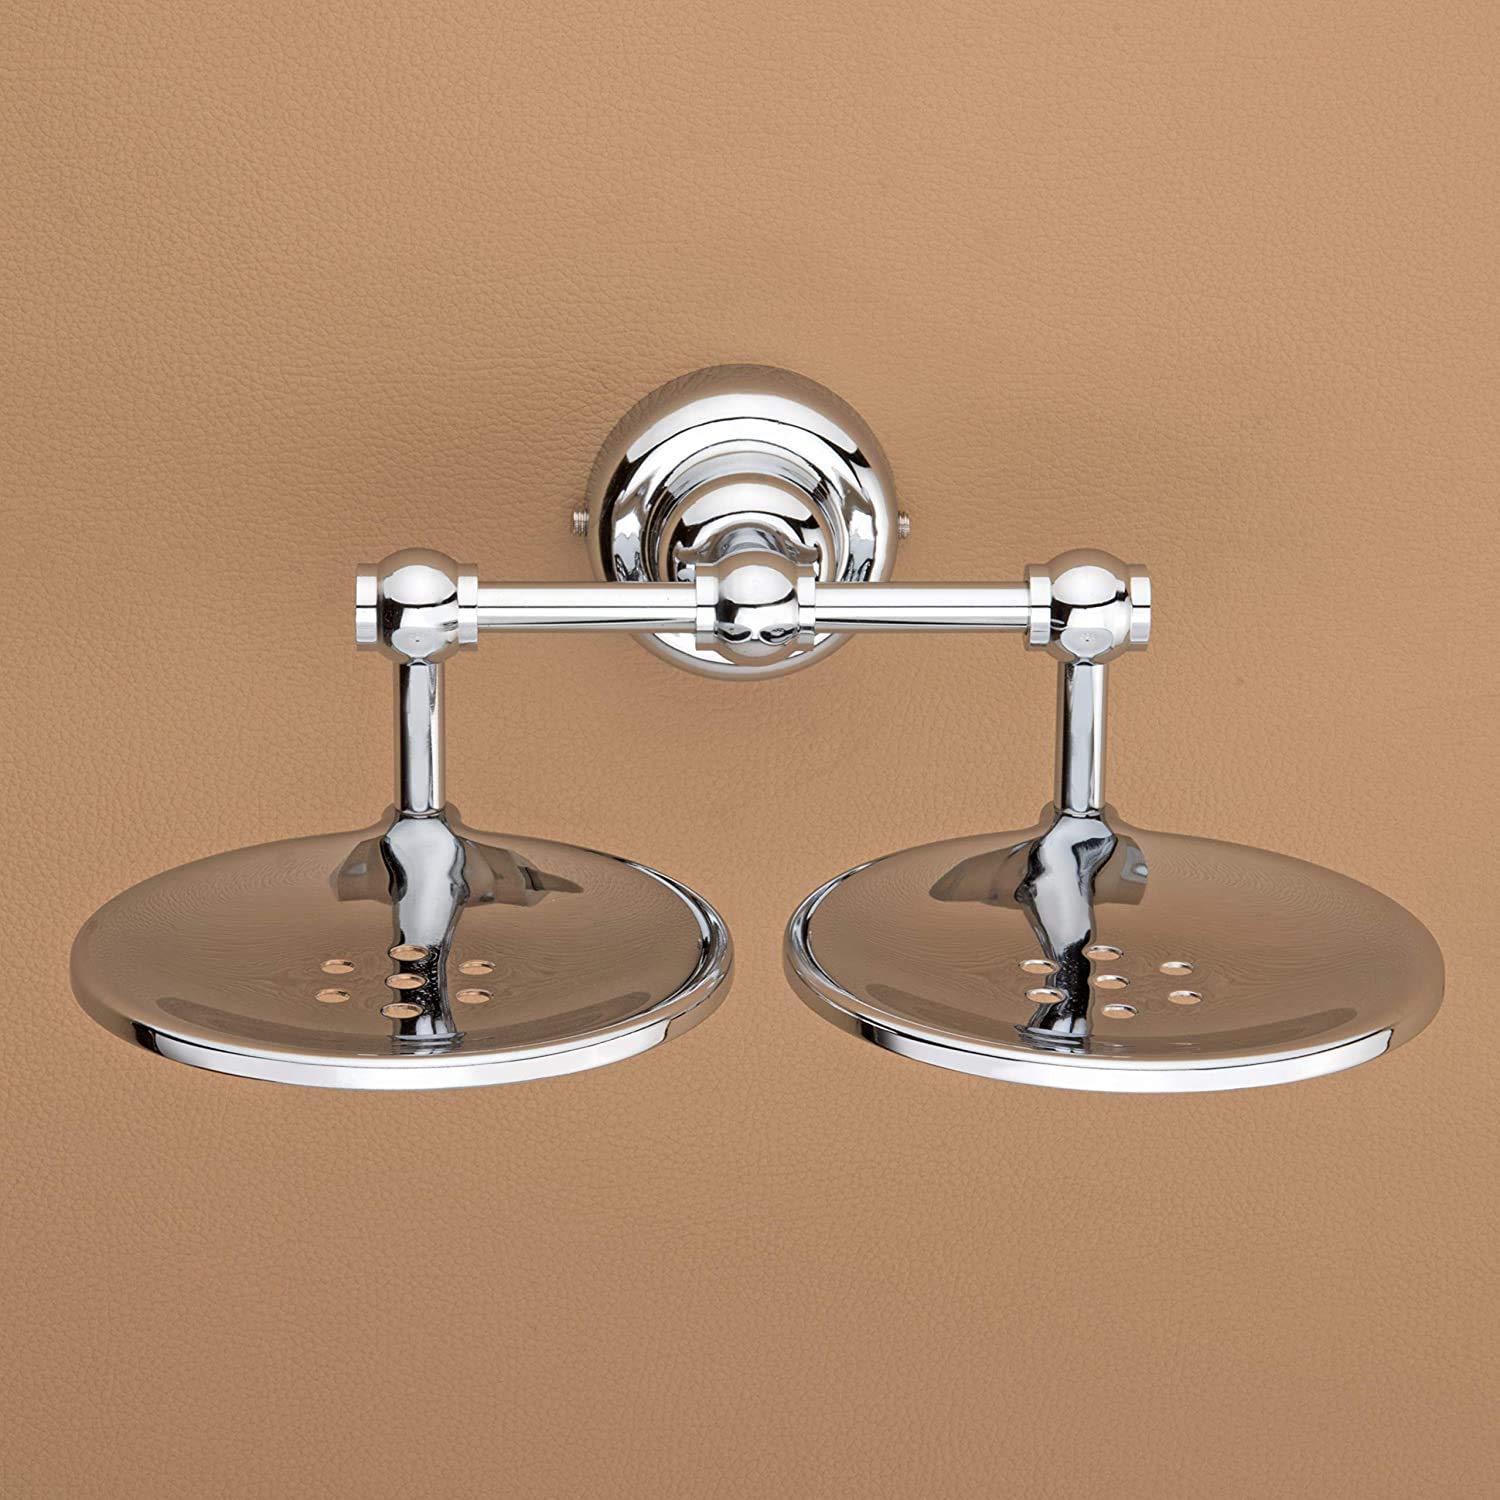 Plantex Stainless Steel 304 Grade Skyllo Double Soap Holder for Bathroom/Soap Dish/Bathroom Soap Stand/Bathroom Accessories(Chrome) - Pack of 2